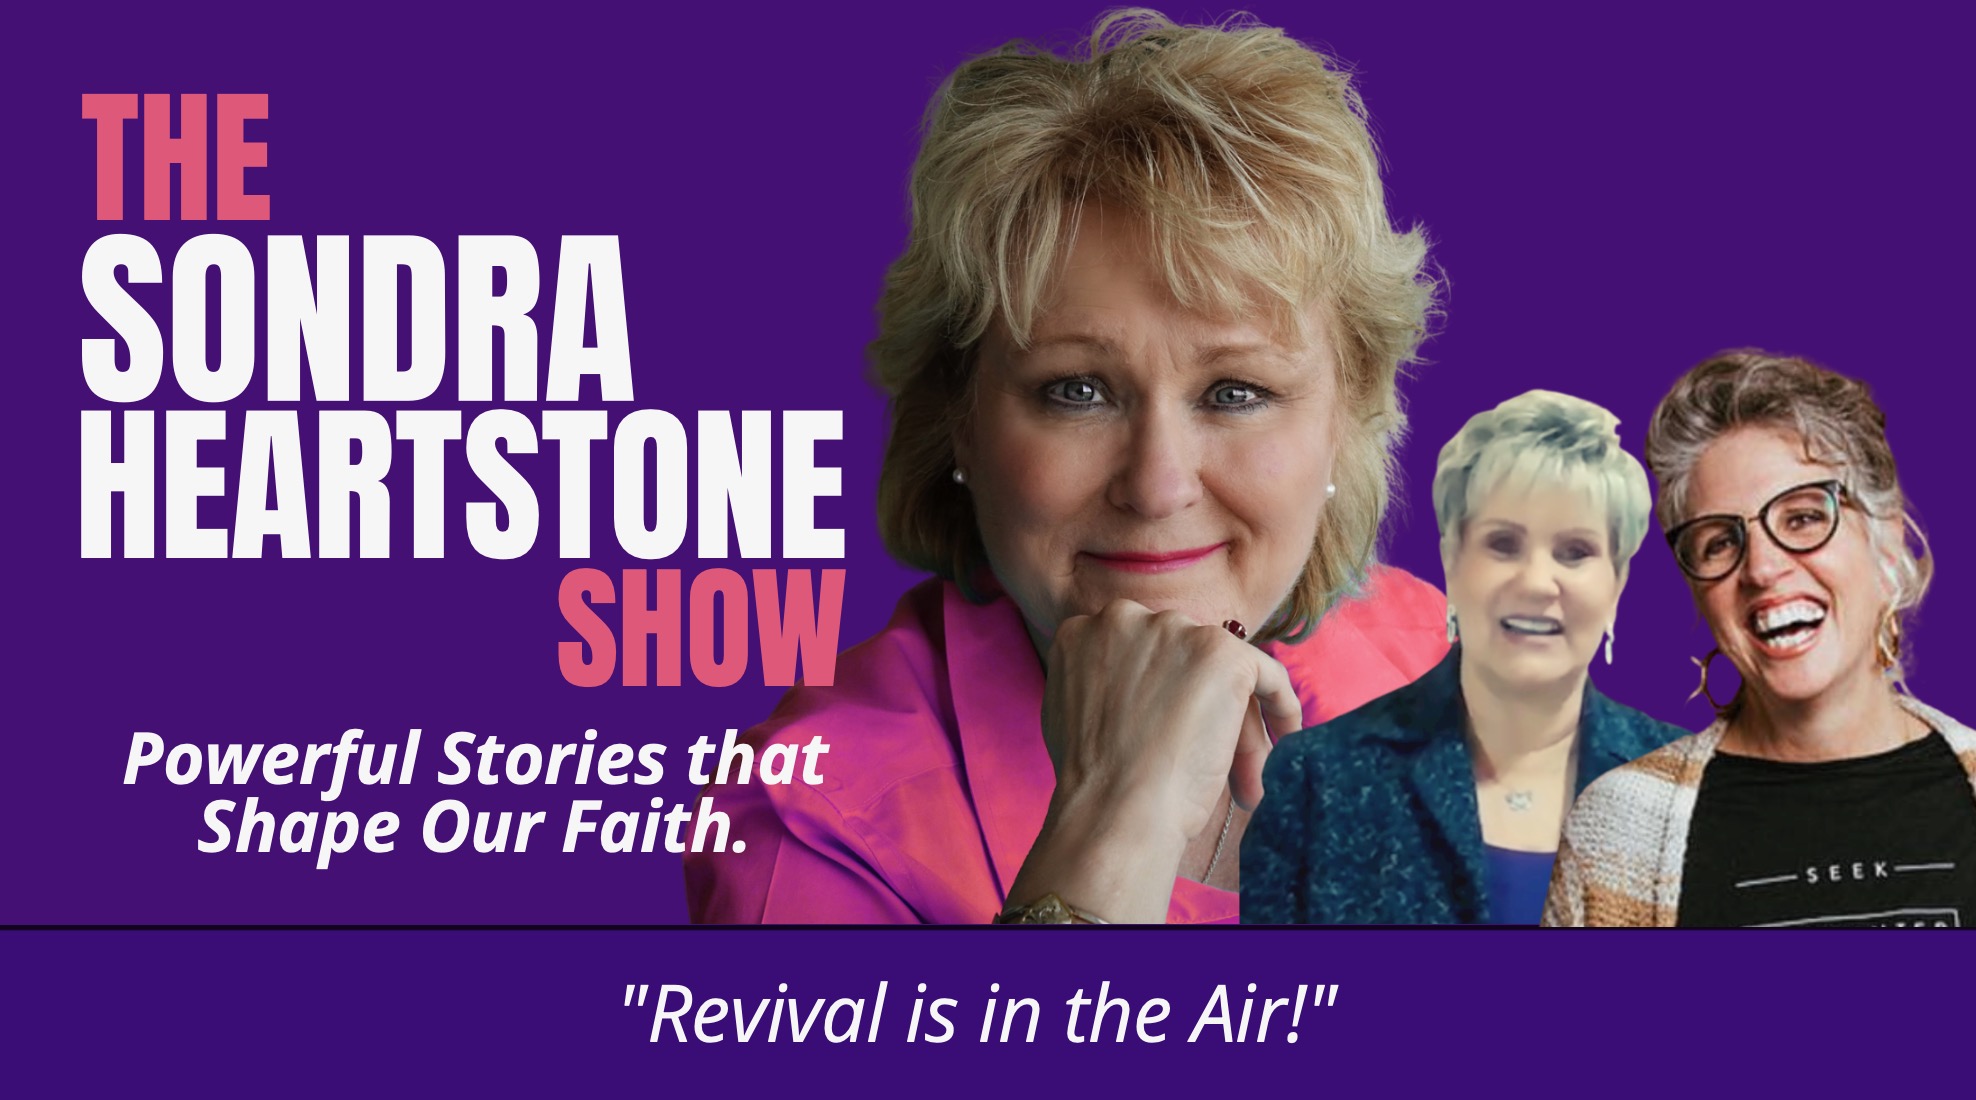 Revival is in the Air!